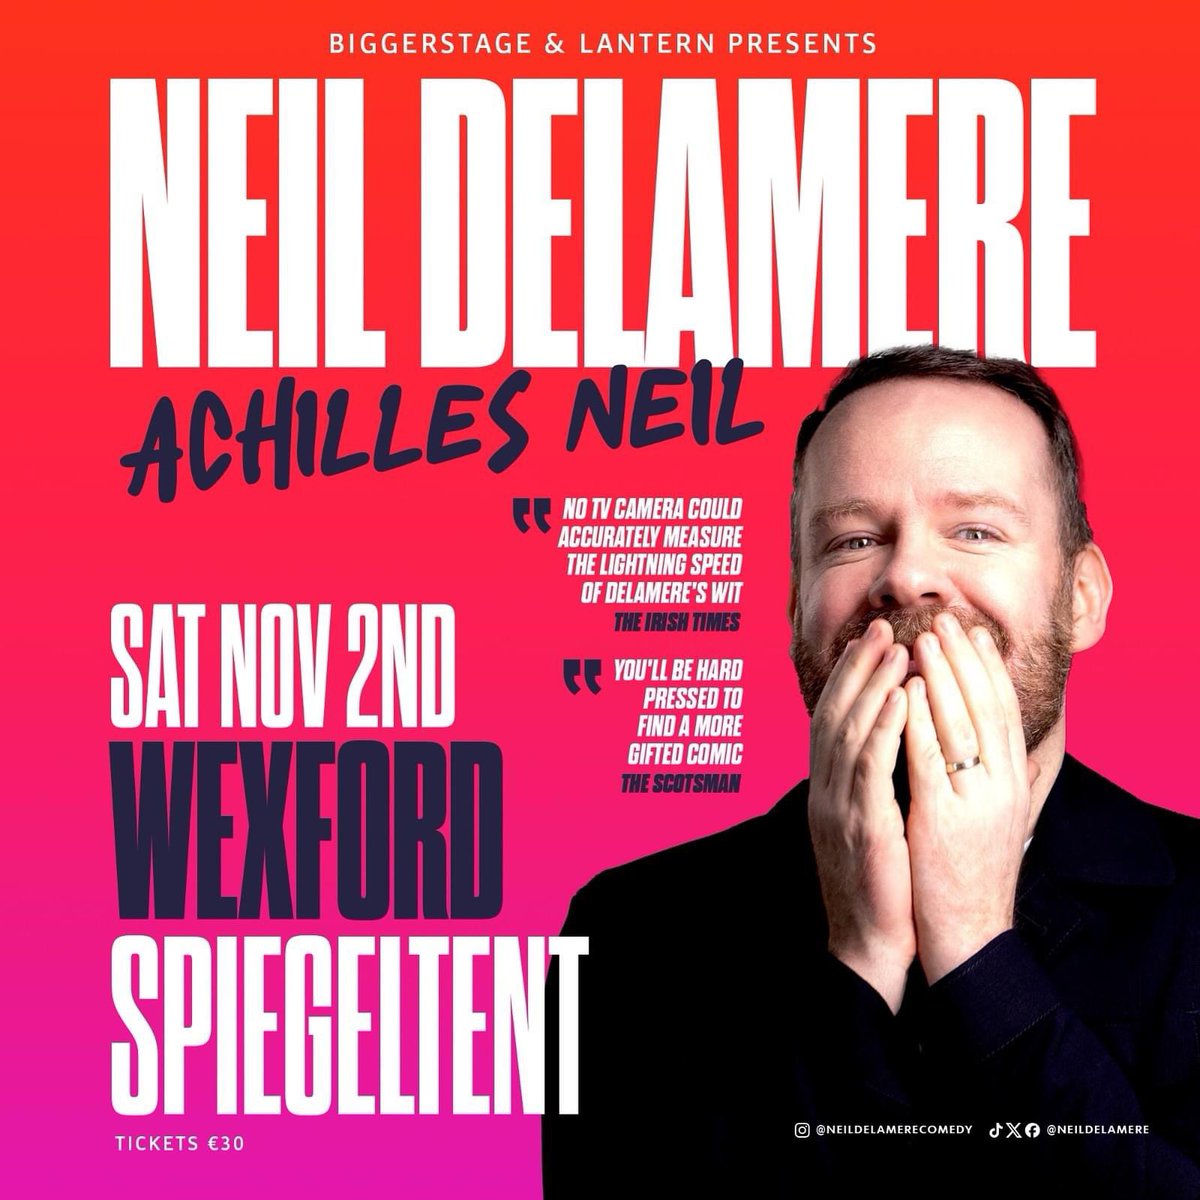 On sale now🙌🏻 Tickets for @neildelamere are on sale now from wexfordspiegeltent.com and lantern.ie